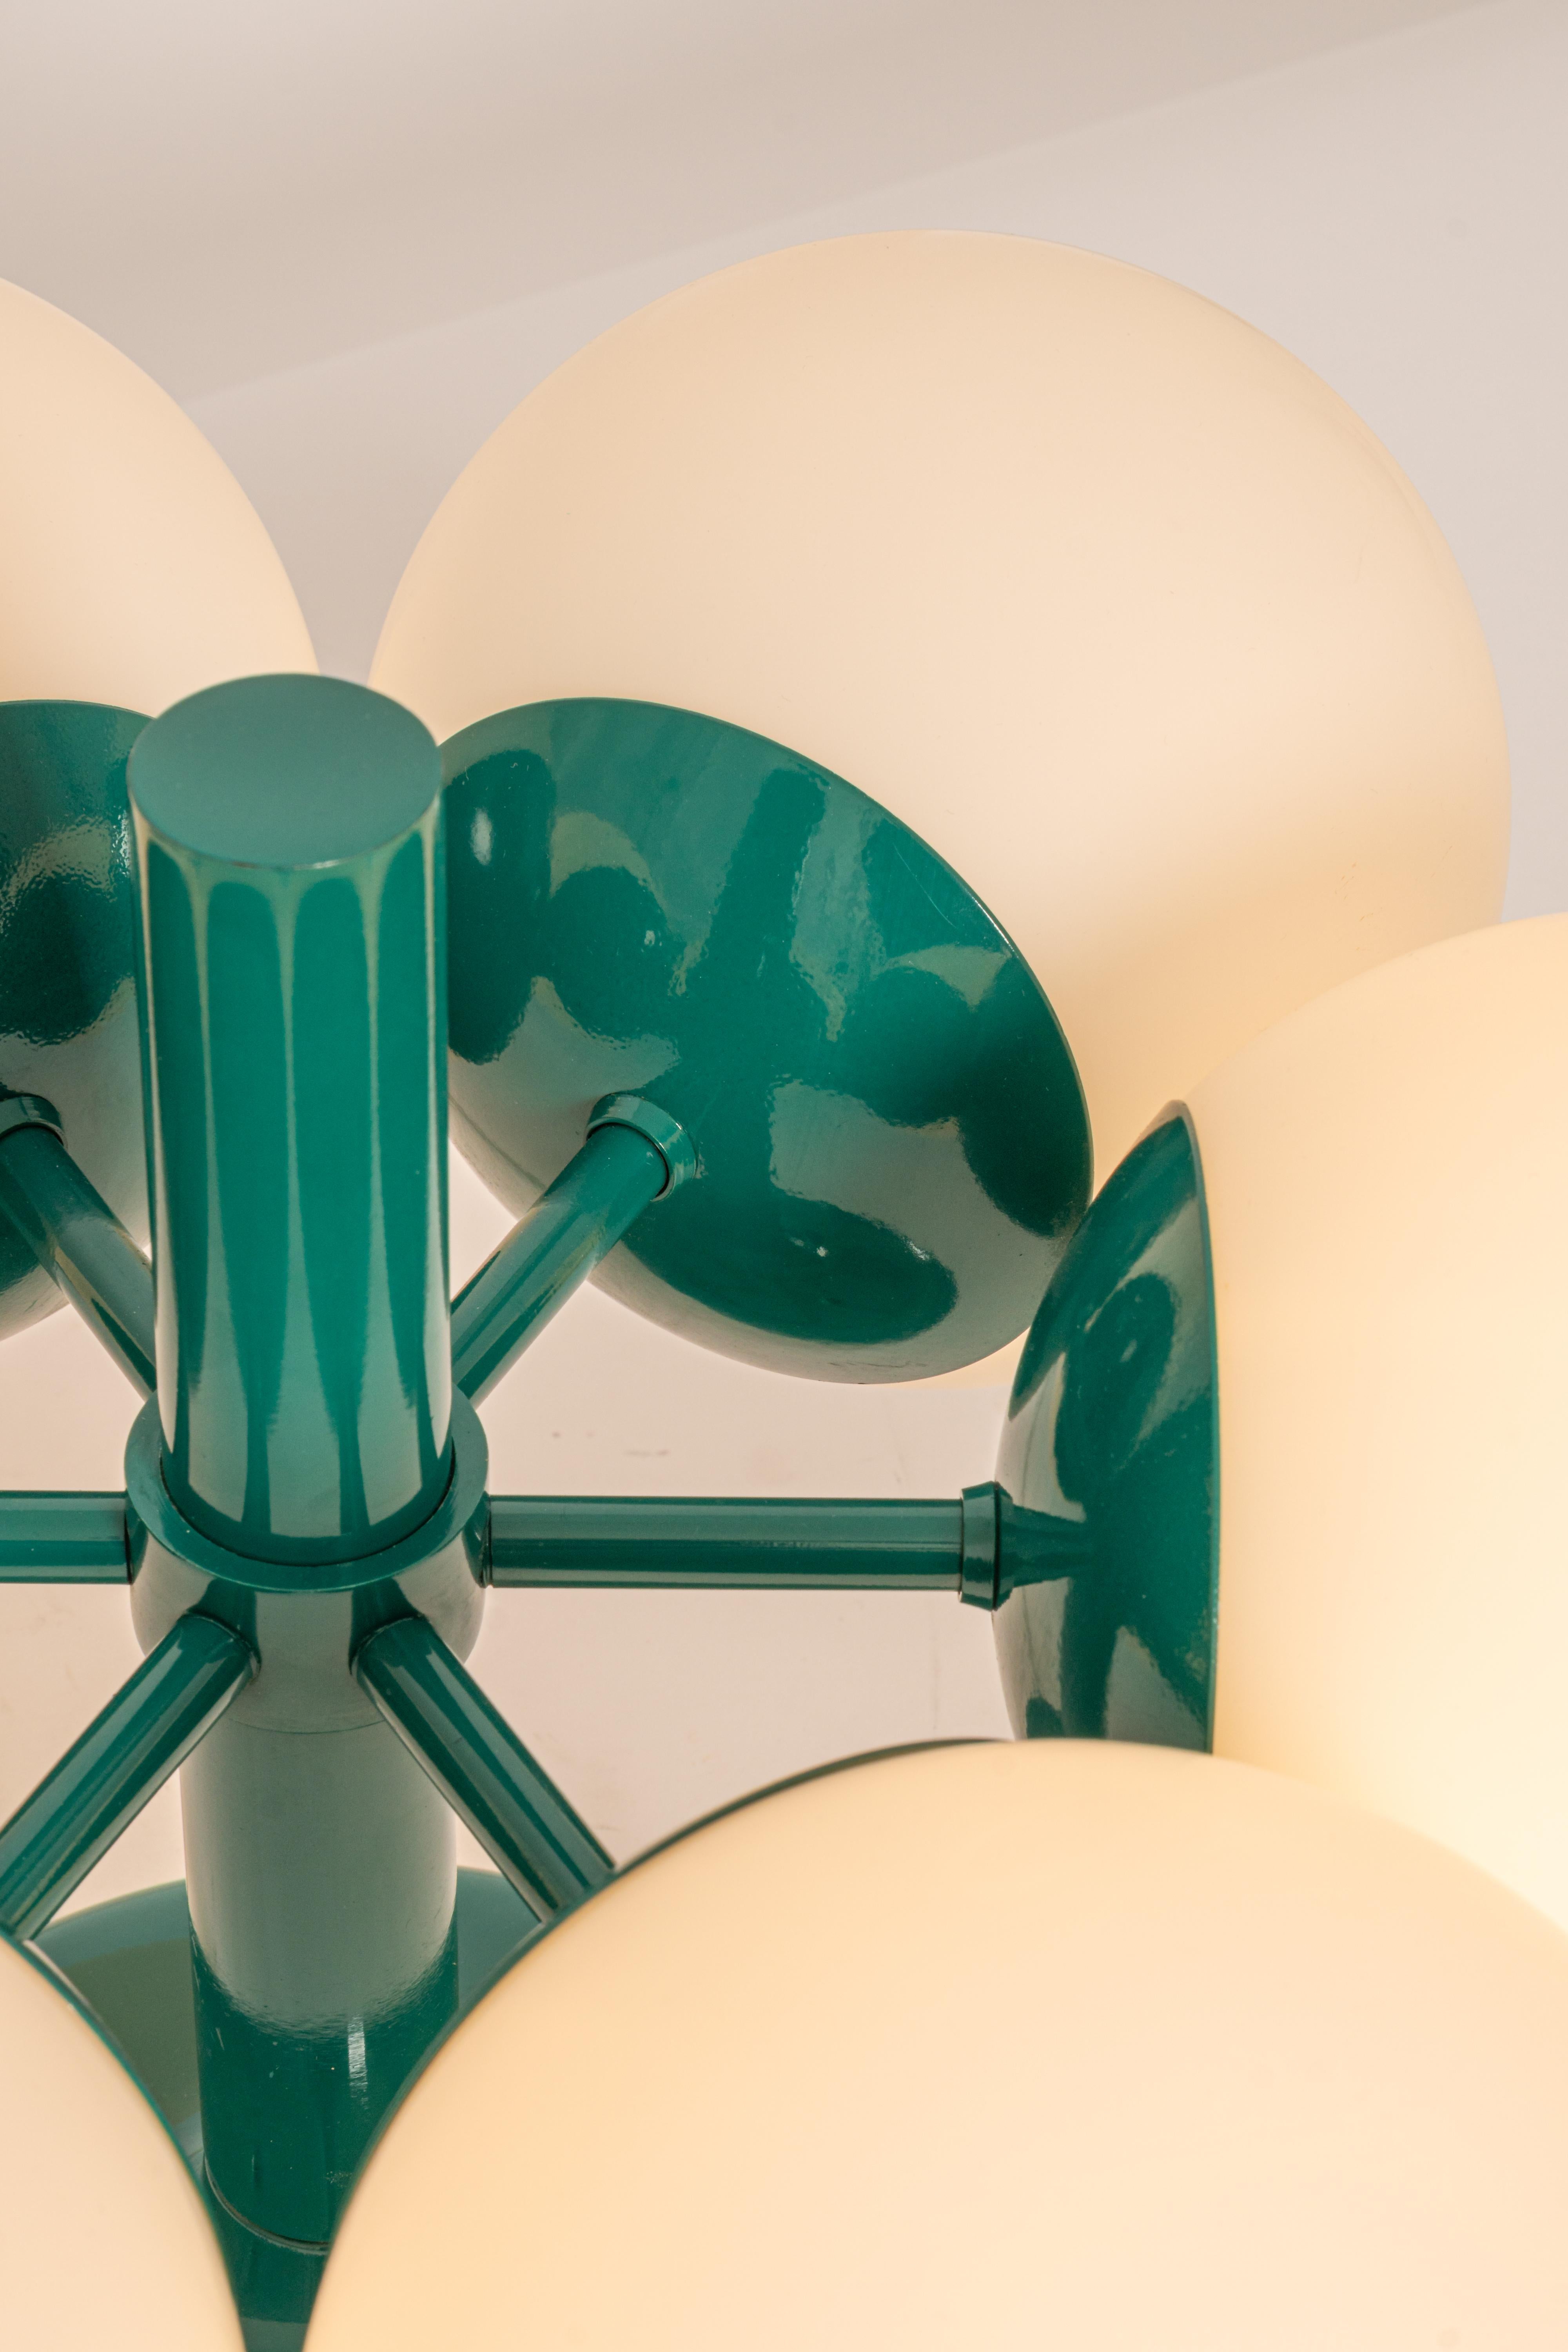 Midcentury Orbital Ceiling /Wall Lamp in Green by Kaiser, Germany, 1970s For Sale 6